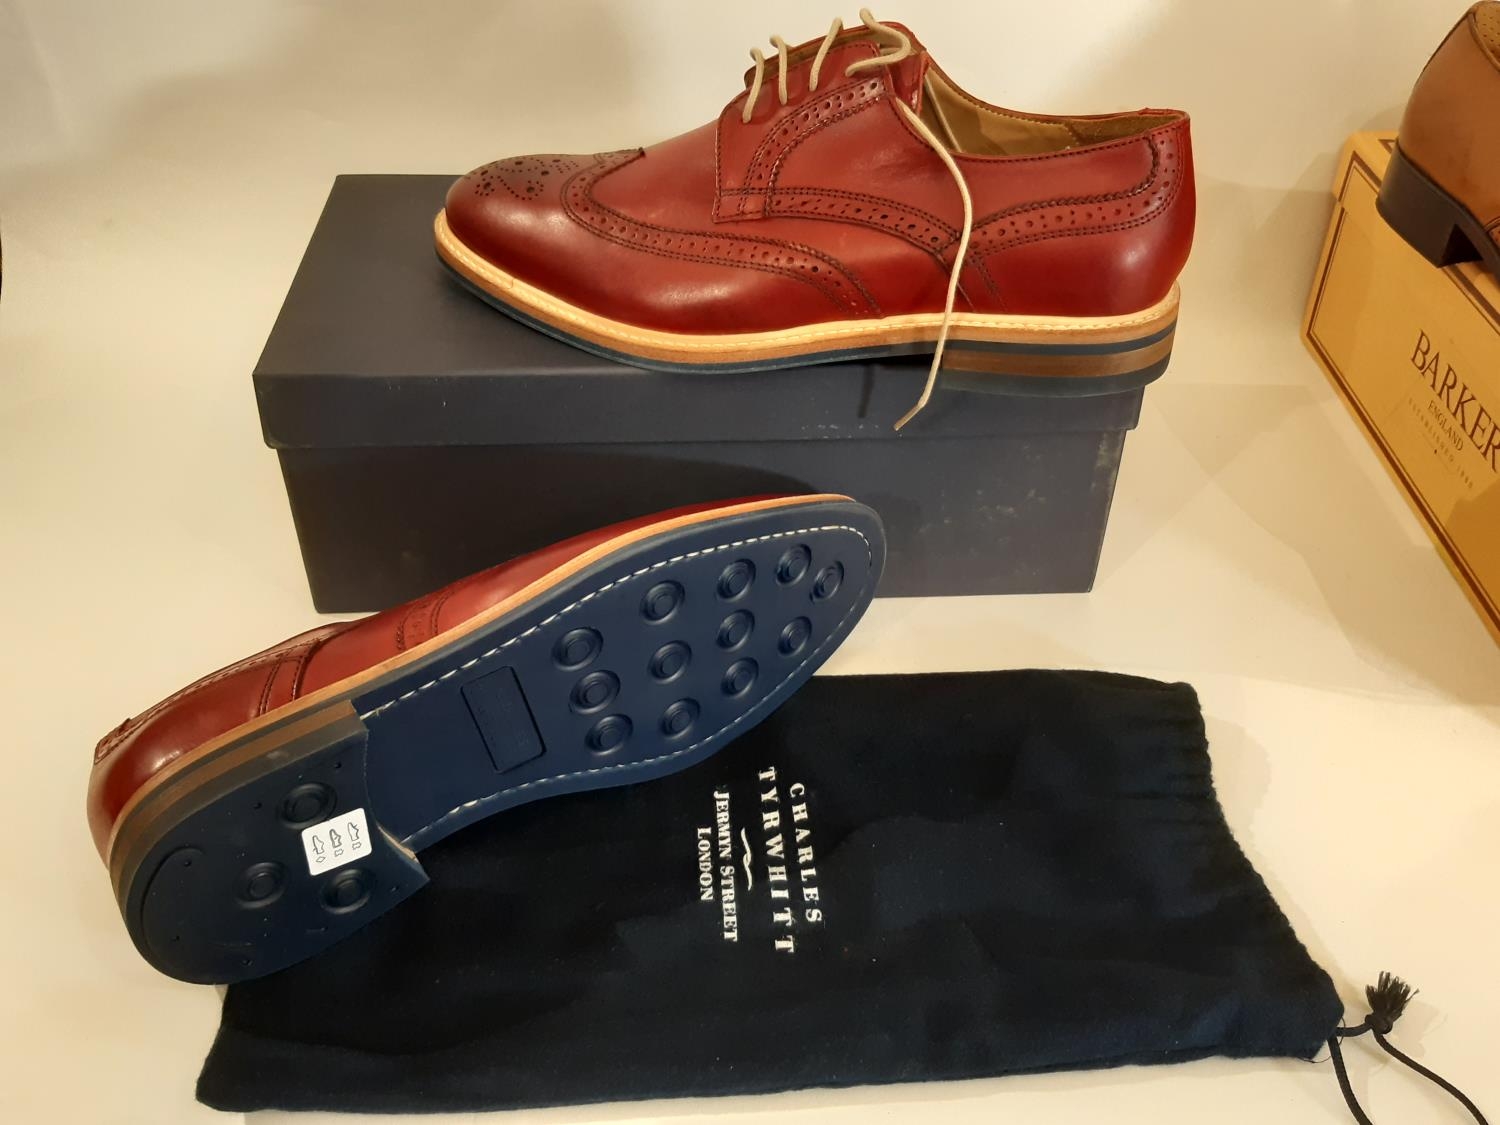 7 pairs of good quality men's shoes/boots/brogues all boxed and appear unworn including shoes by - Image 4 of 5